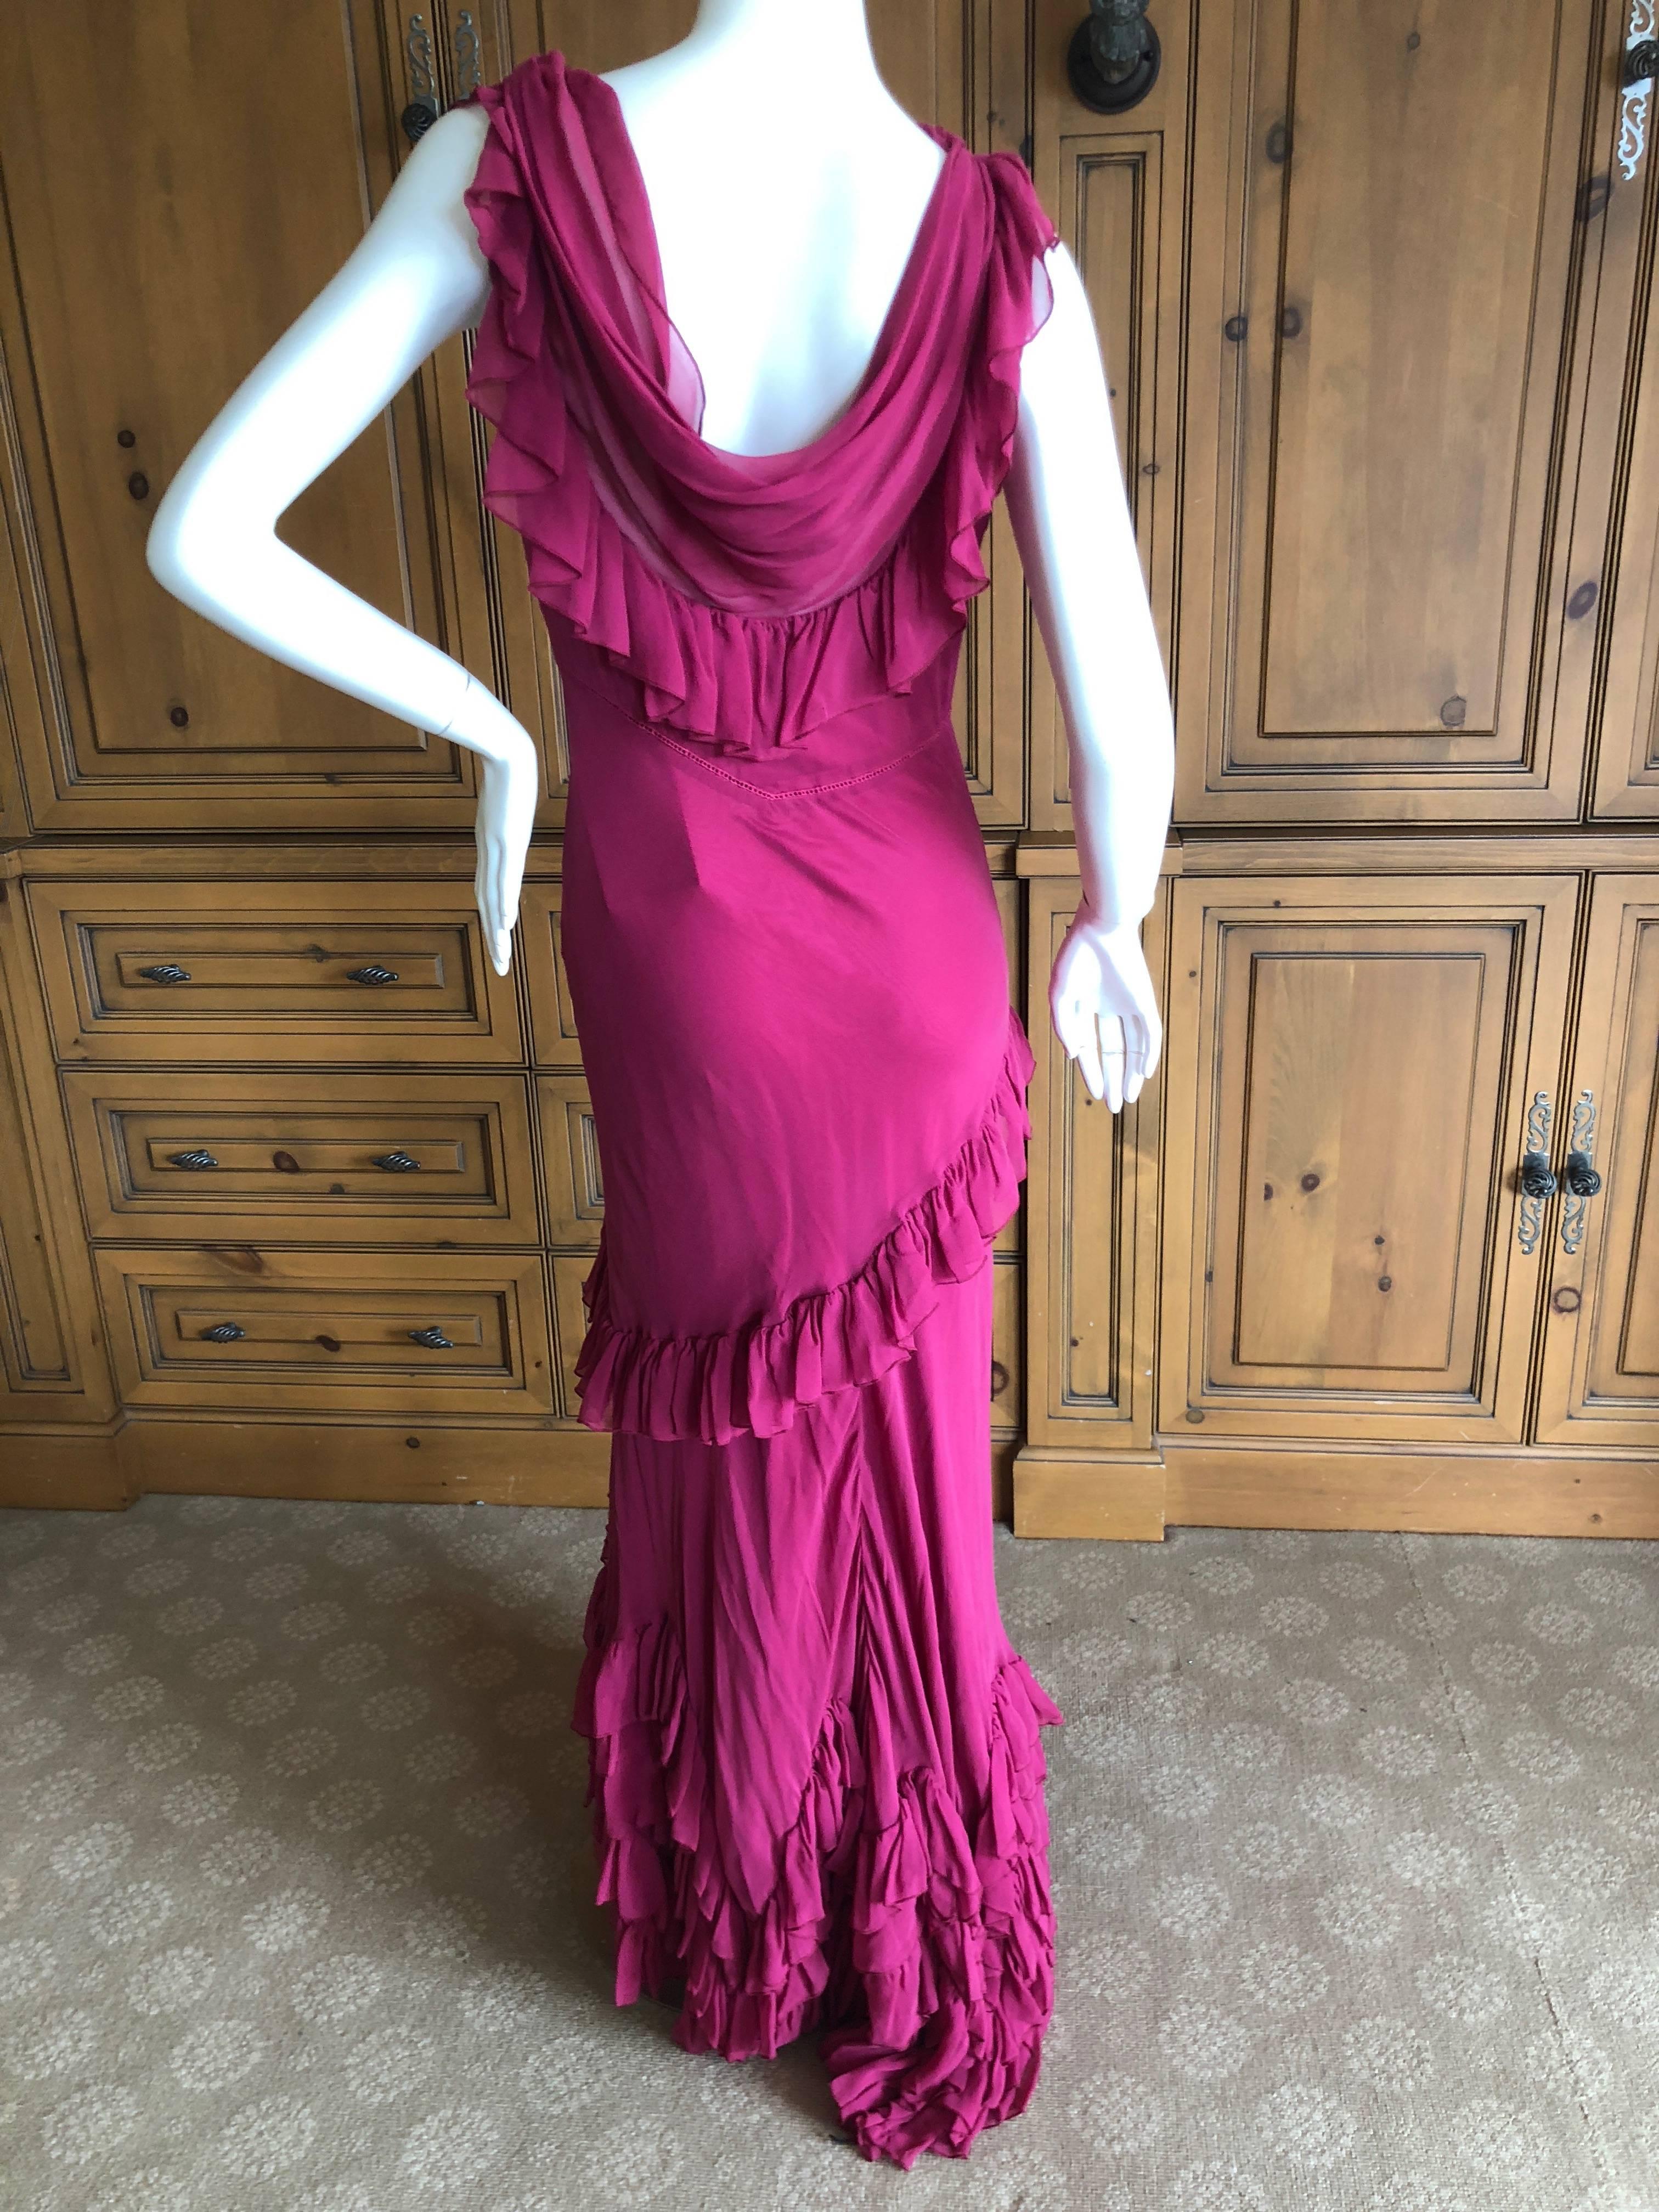 John Galliano Raspberry Sheer Vintage Silk Ruffled Evening Dress with Cowl Back  For Sale 1